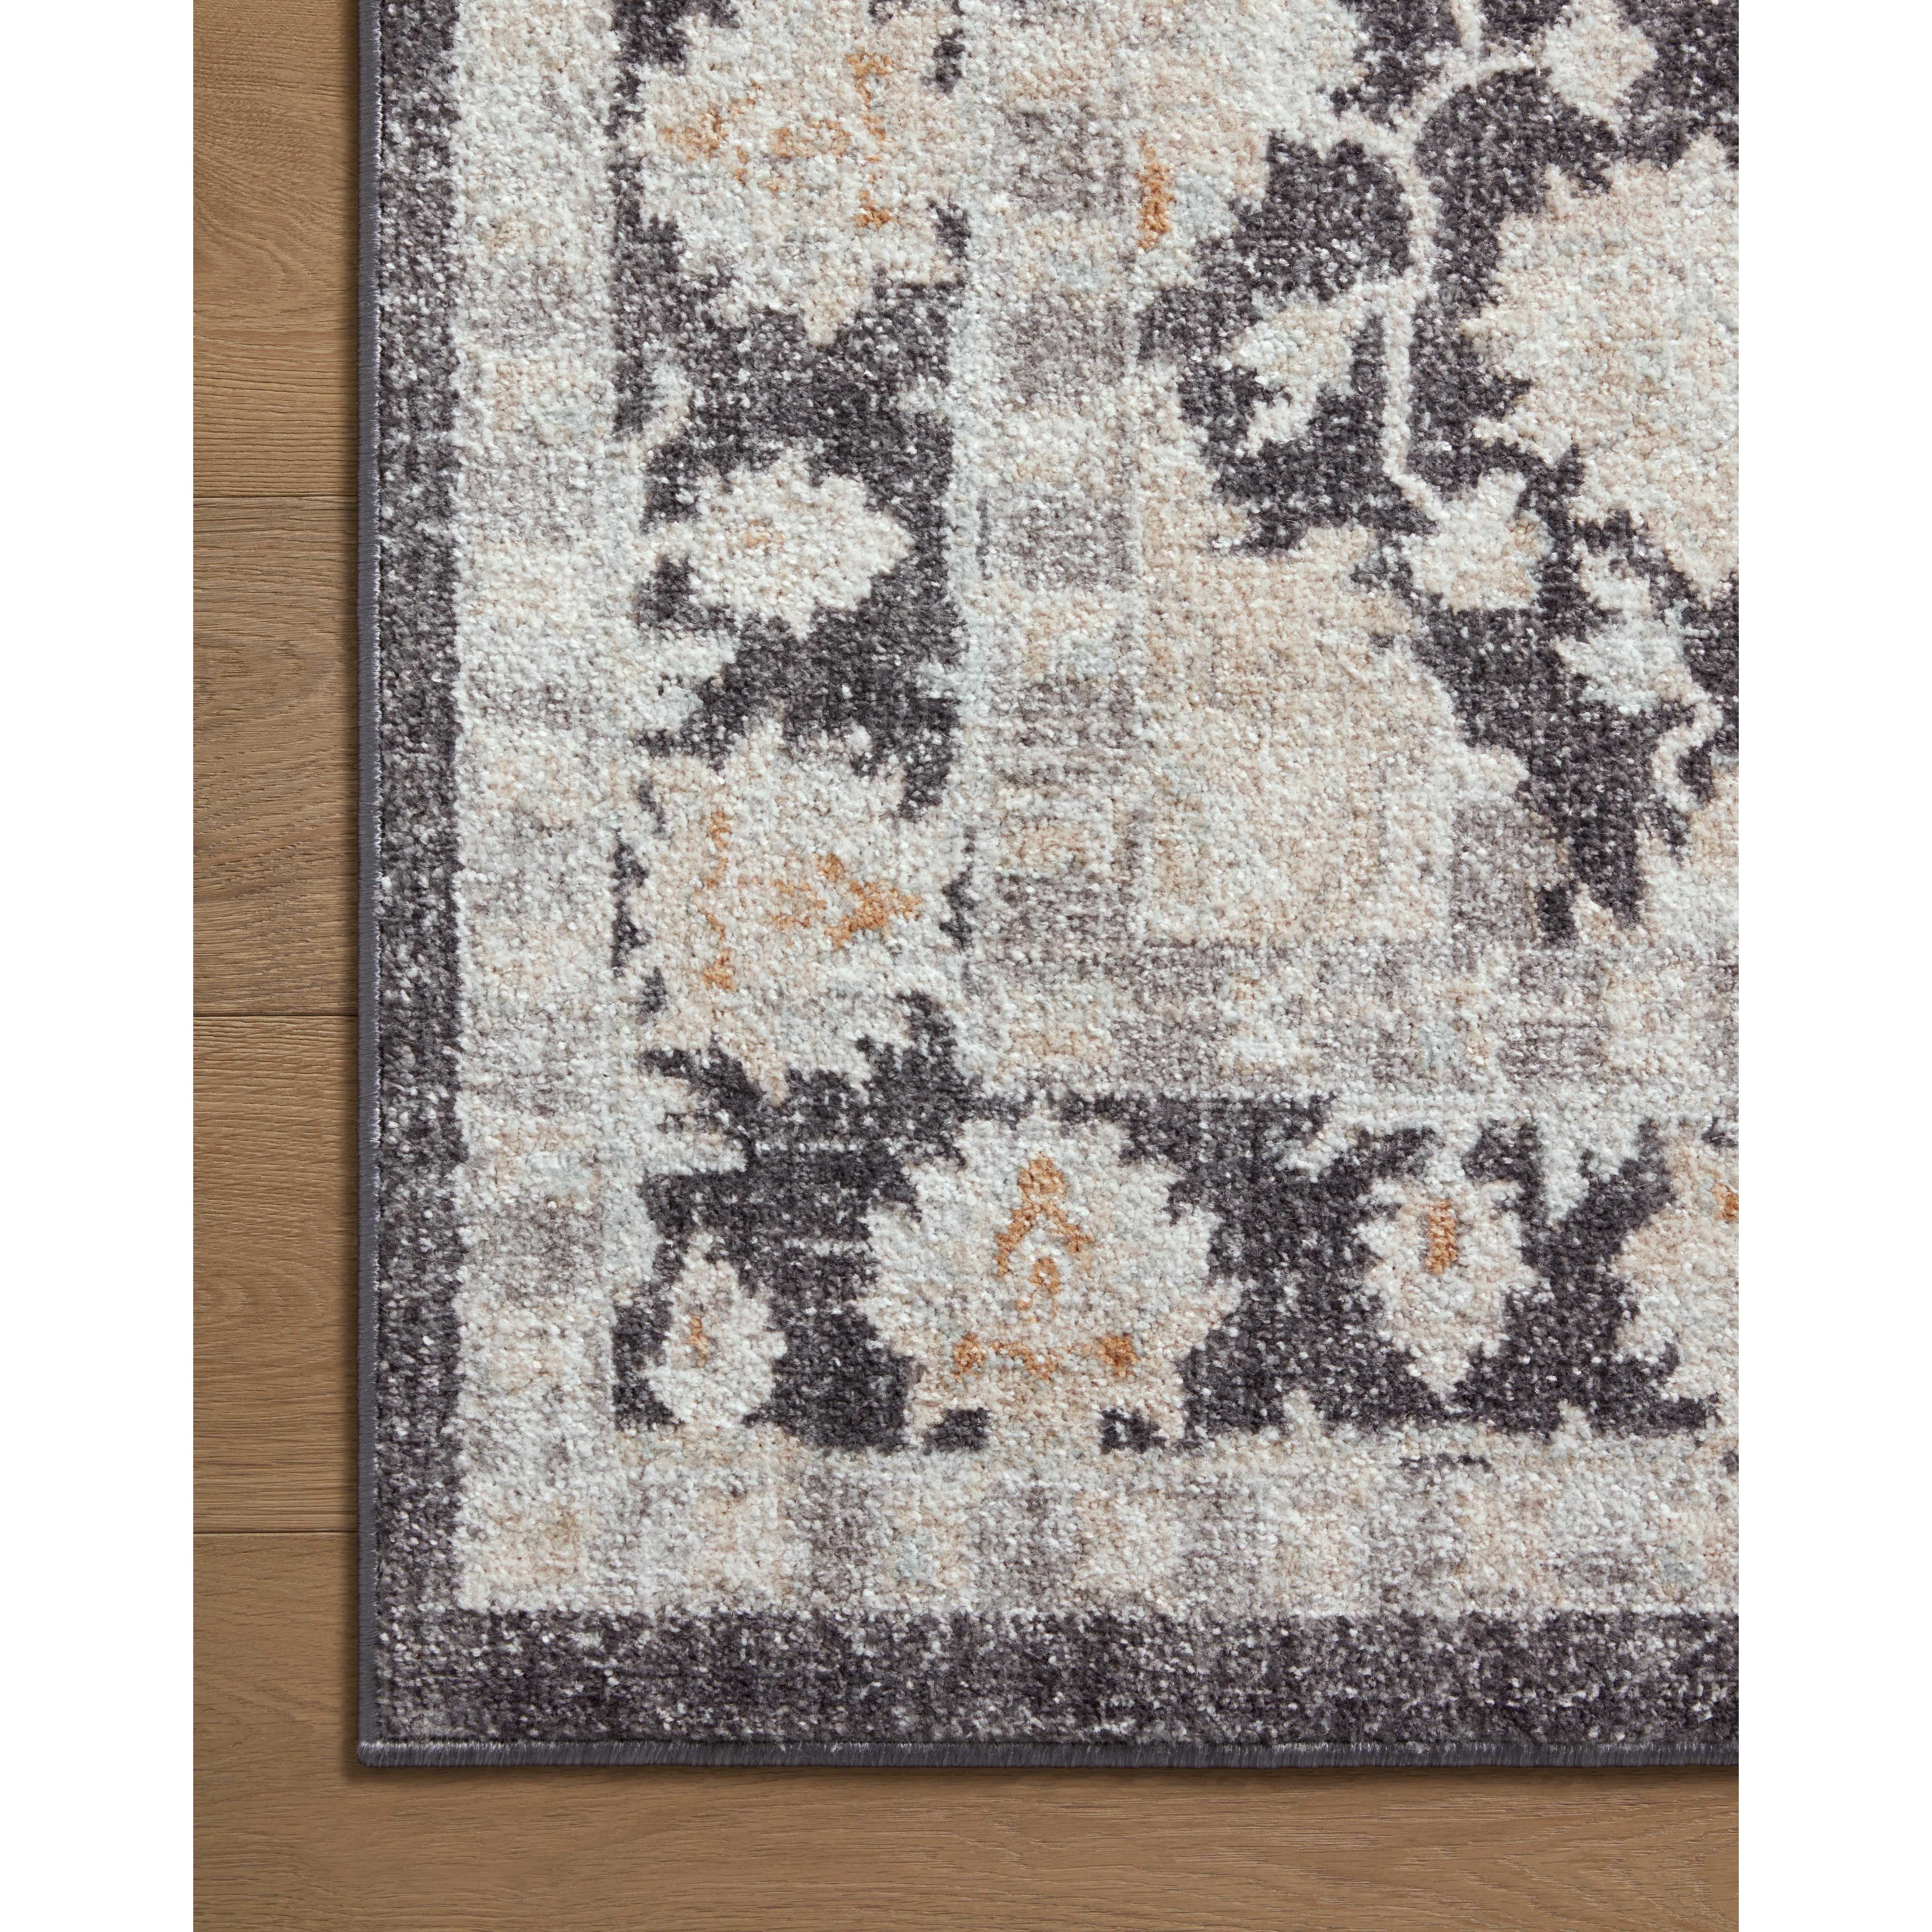 Inspired by antique Turkish Oushak carpets with large-scale motifs, the Monroe Charcoal / Natural Rug modernizes the traditional design in neutral palettes, many of which have black details that anchor the rug in the room. Monroe is power-loomed of 100% polypropylene for easy care and reliable durability. Amethyst Home provides interior design, new construction, custom furniture, and area rugs in the Scottsdale metro area.